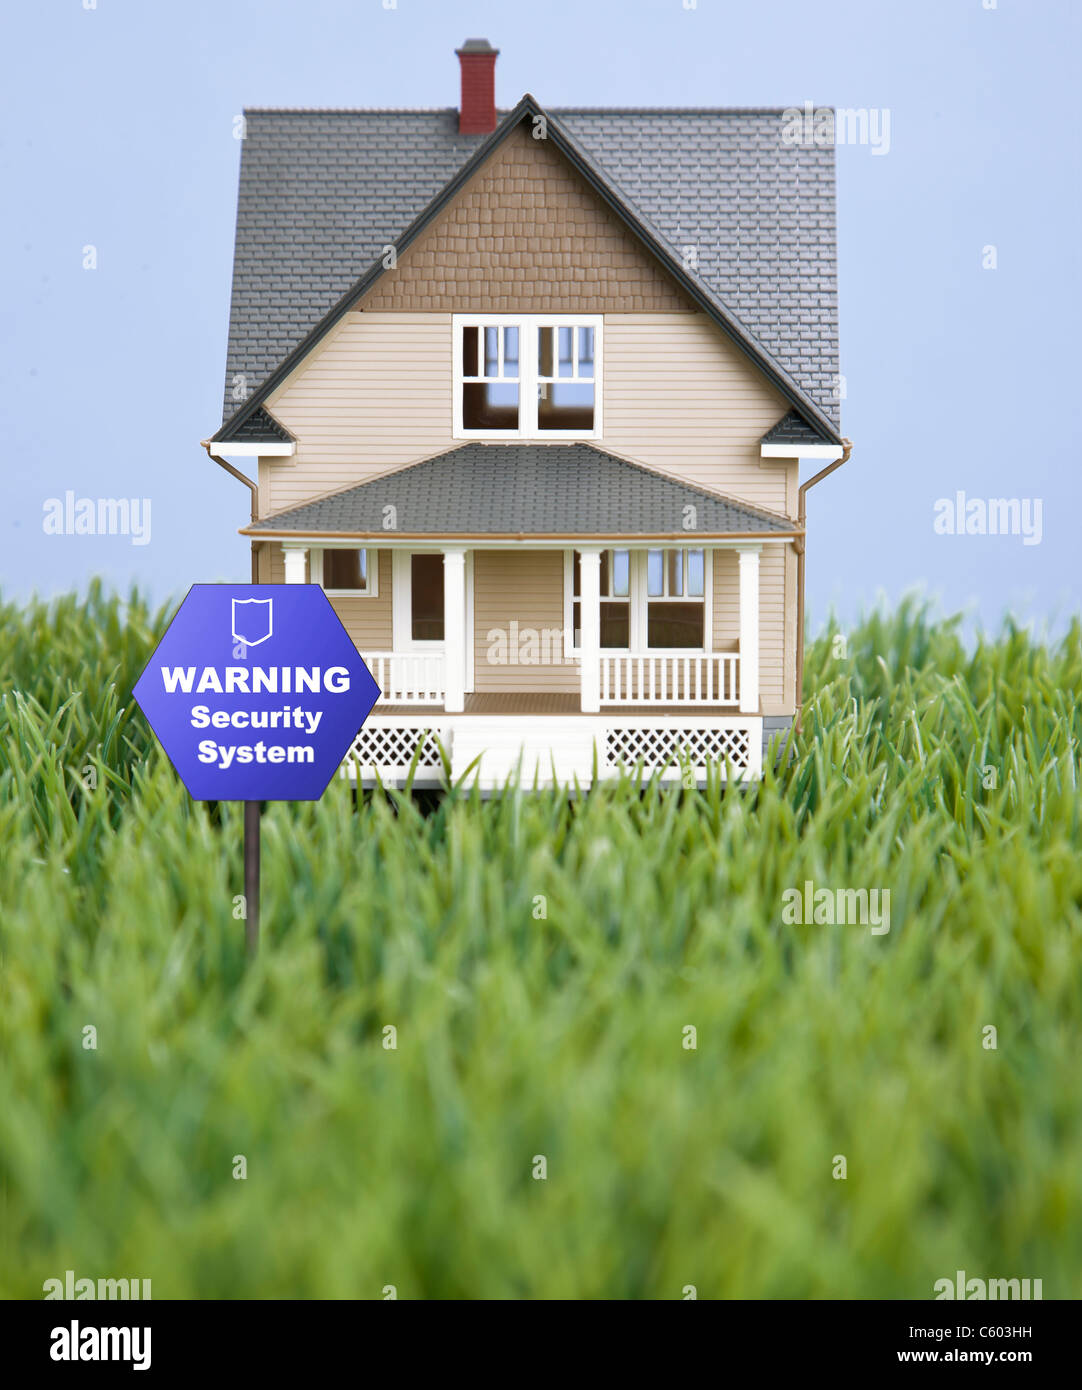 Model house on fake grass with warning security sign Stock Photo